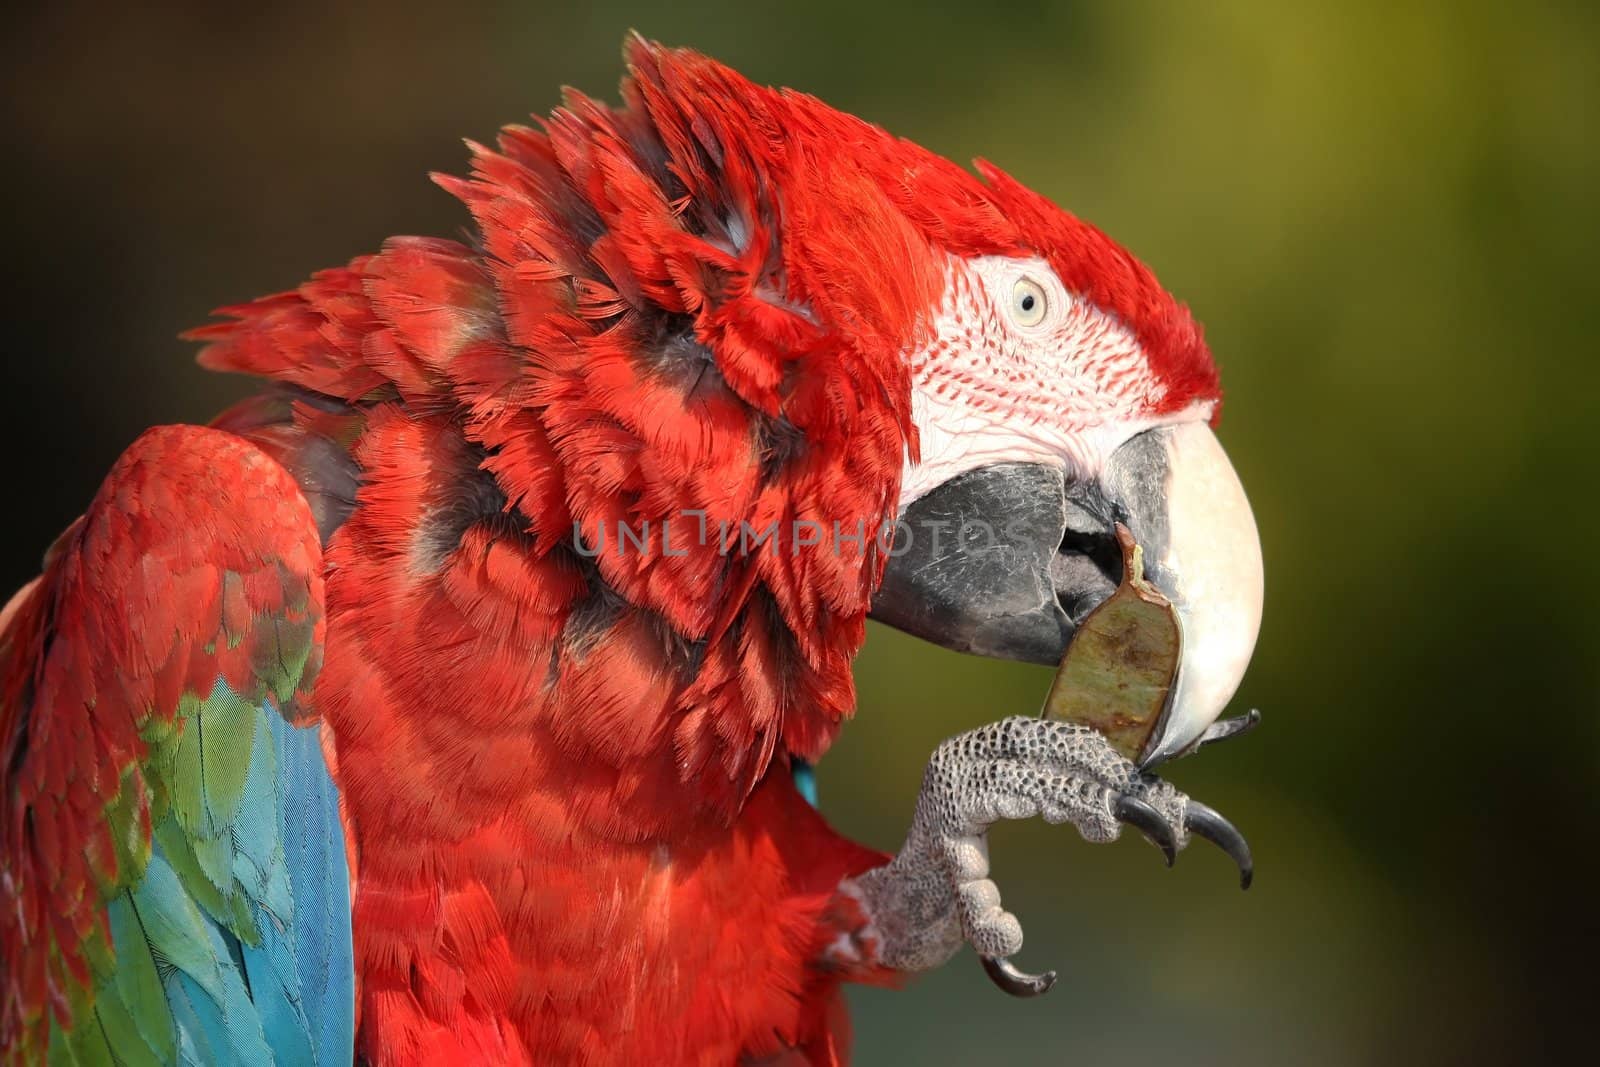 Scarlet macaw bird eating a seed pod held in it's claws